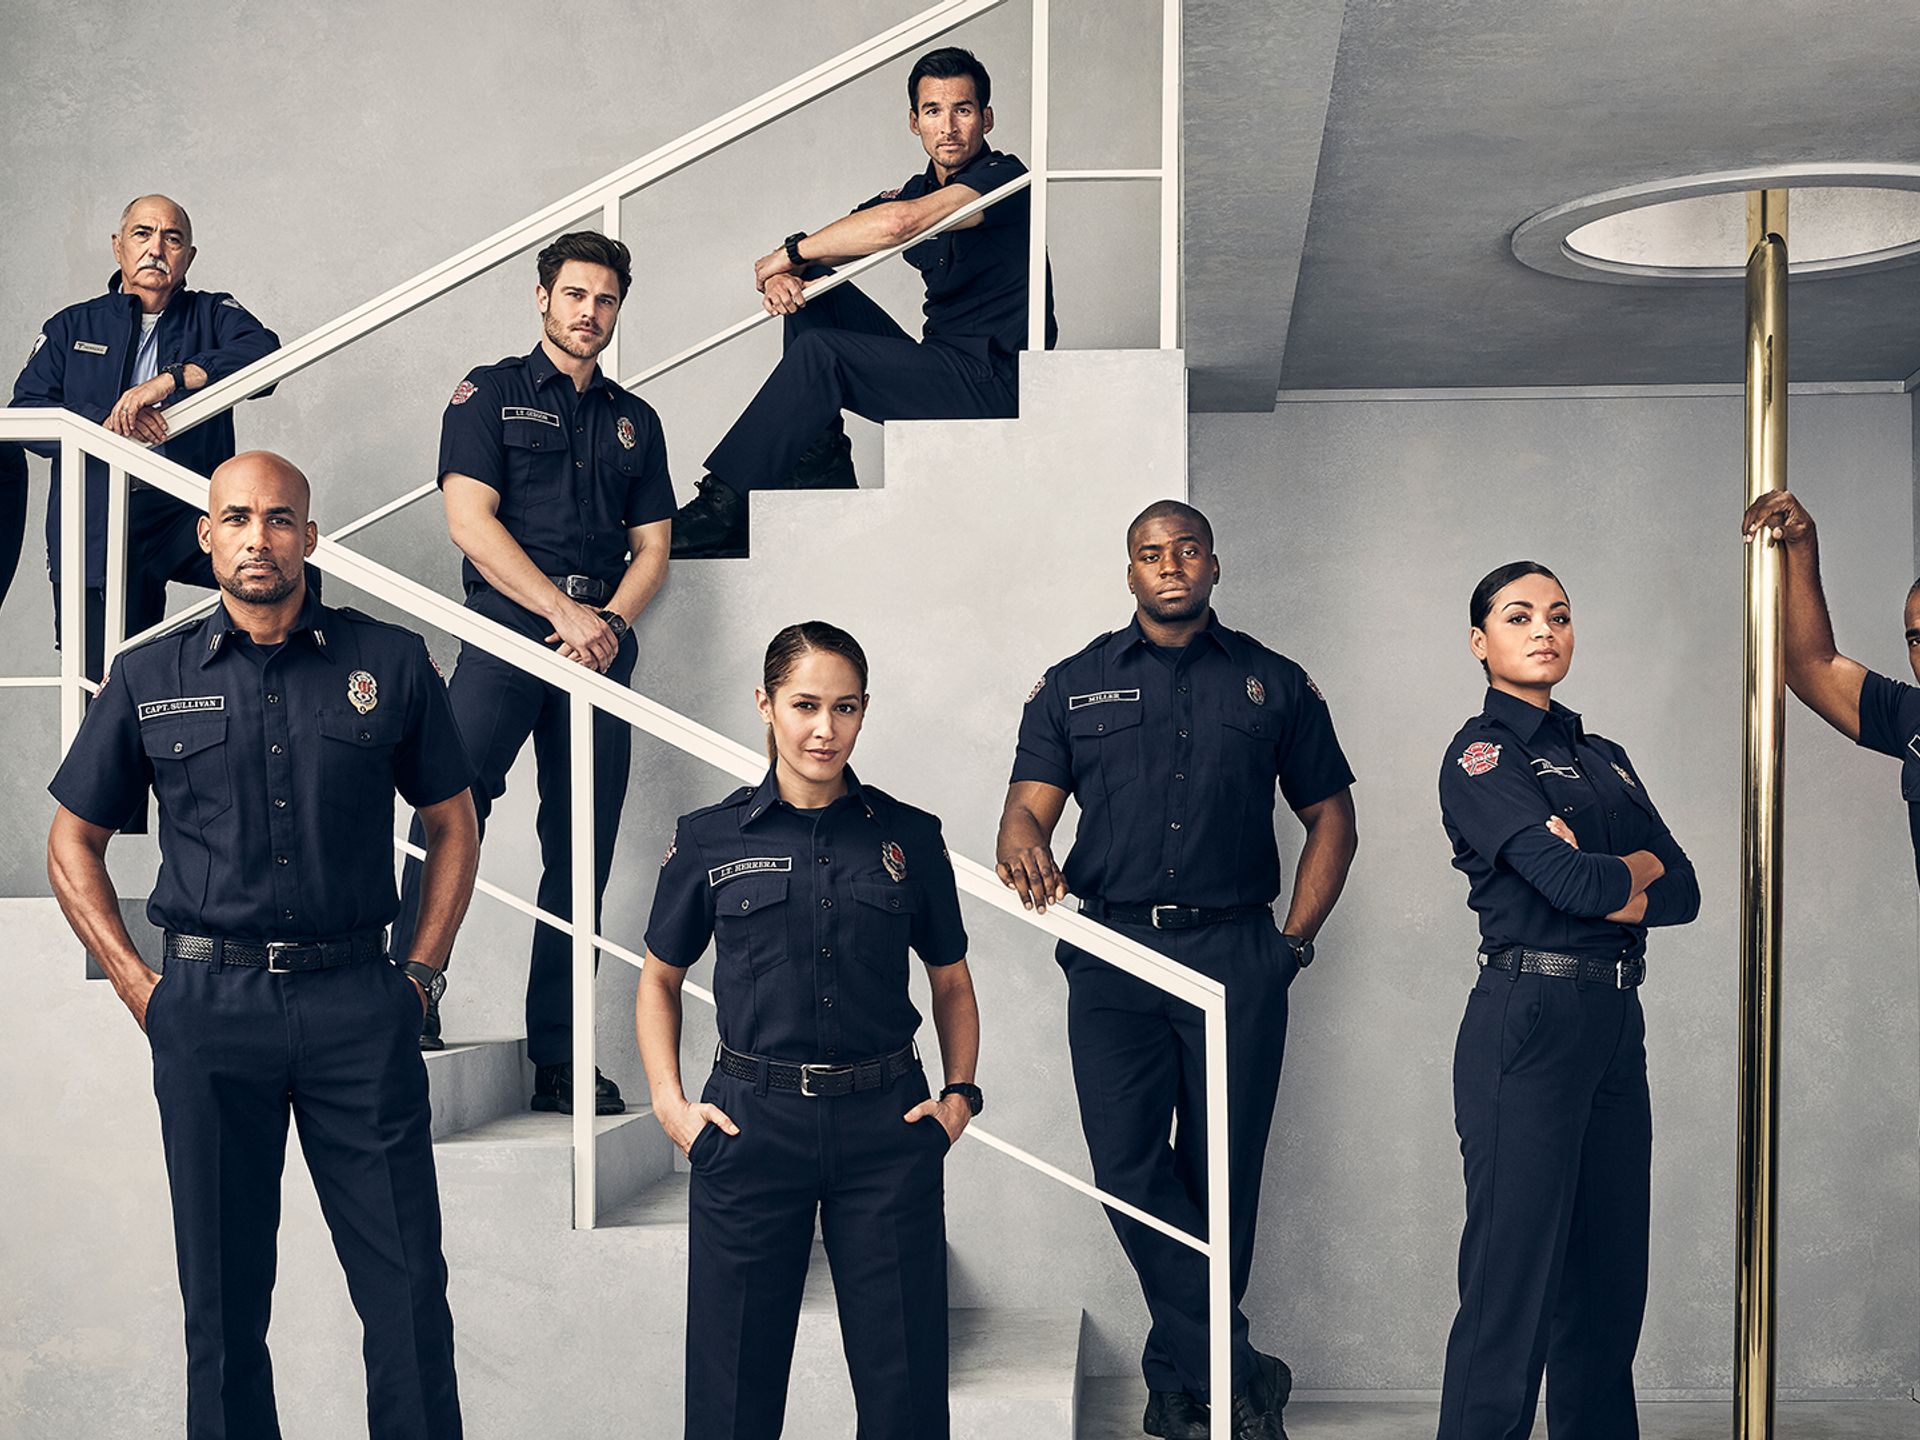 Station 19 cancelled after seven seasons: 'Still processing this